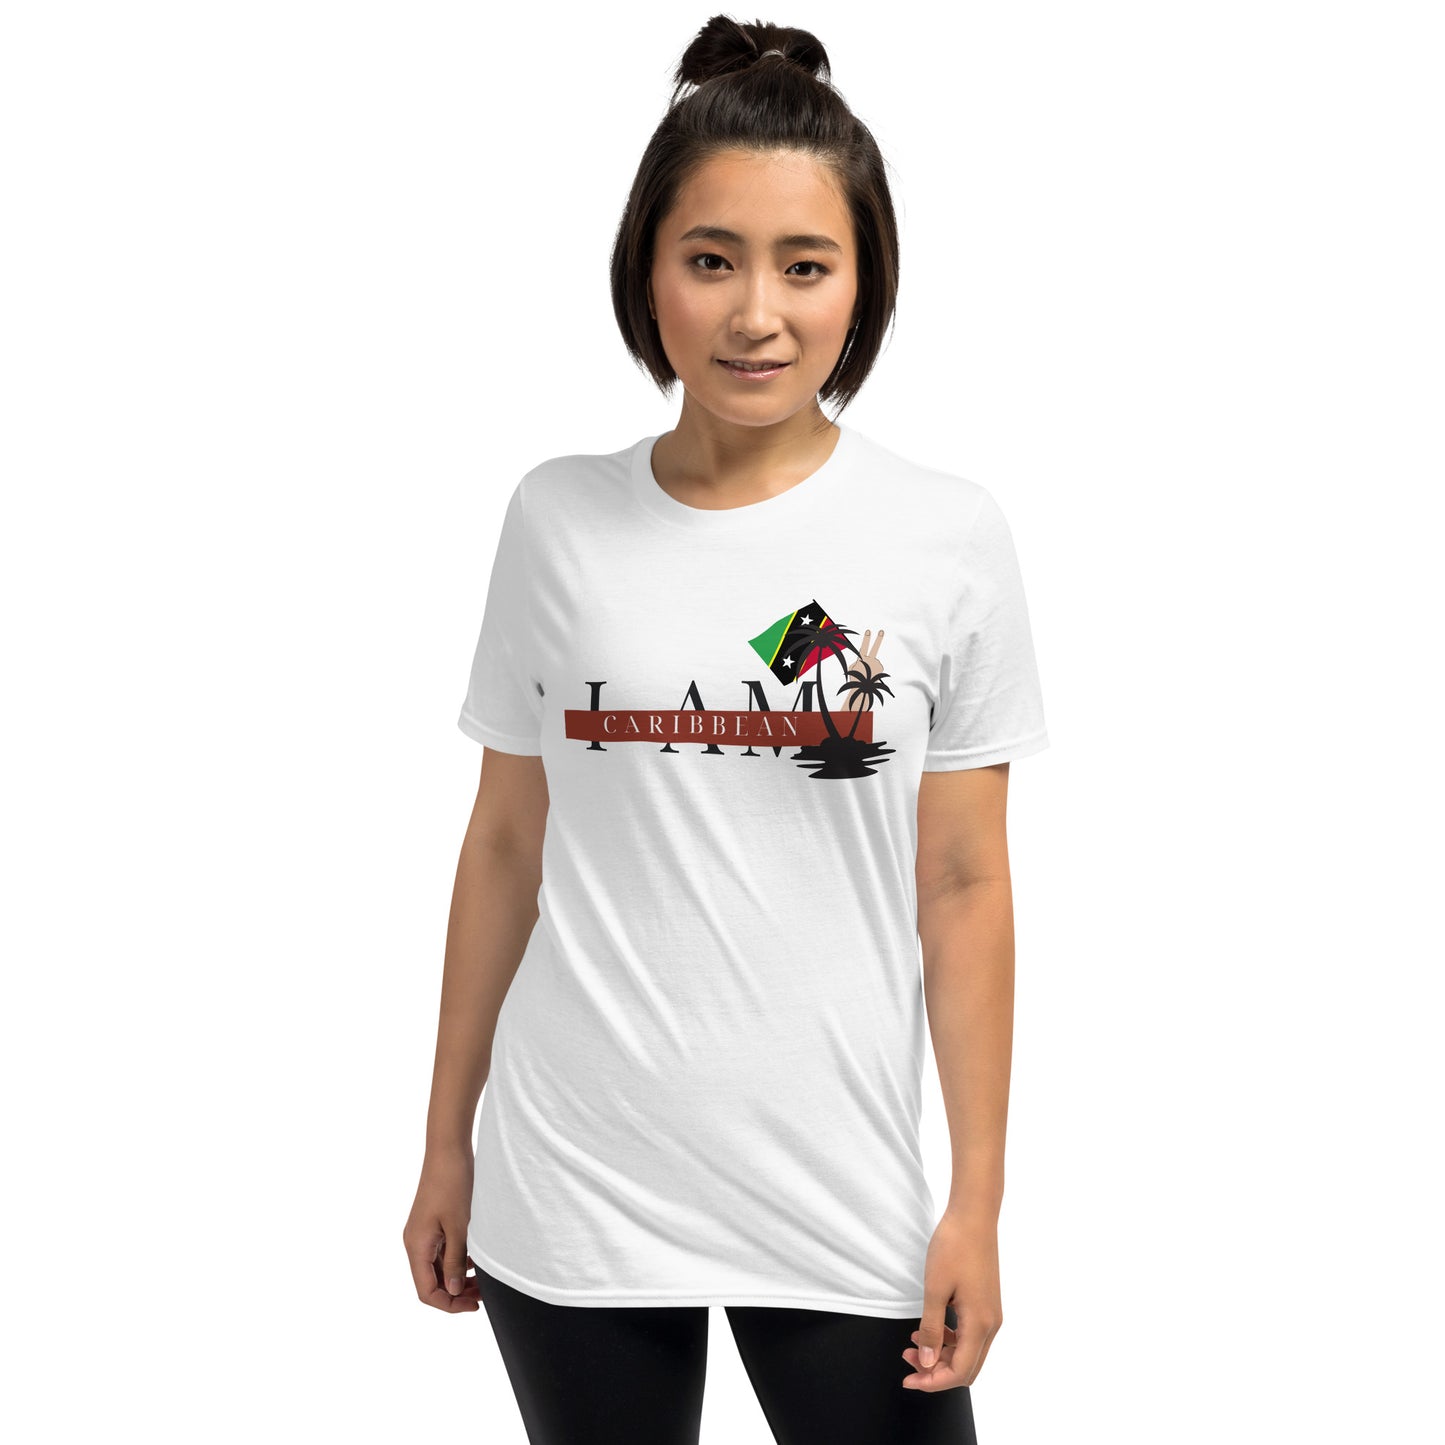 St. Kitts and Nevis Unisex Soft-style T-Shirt